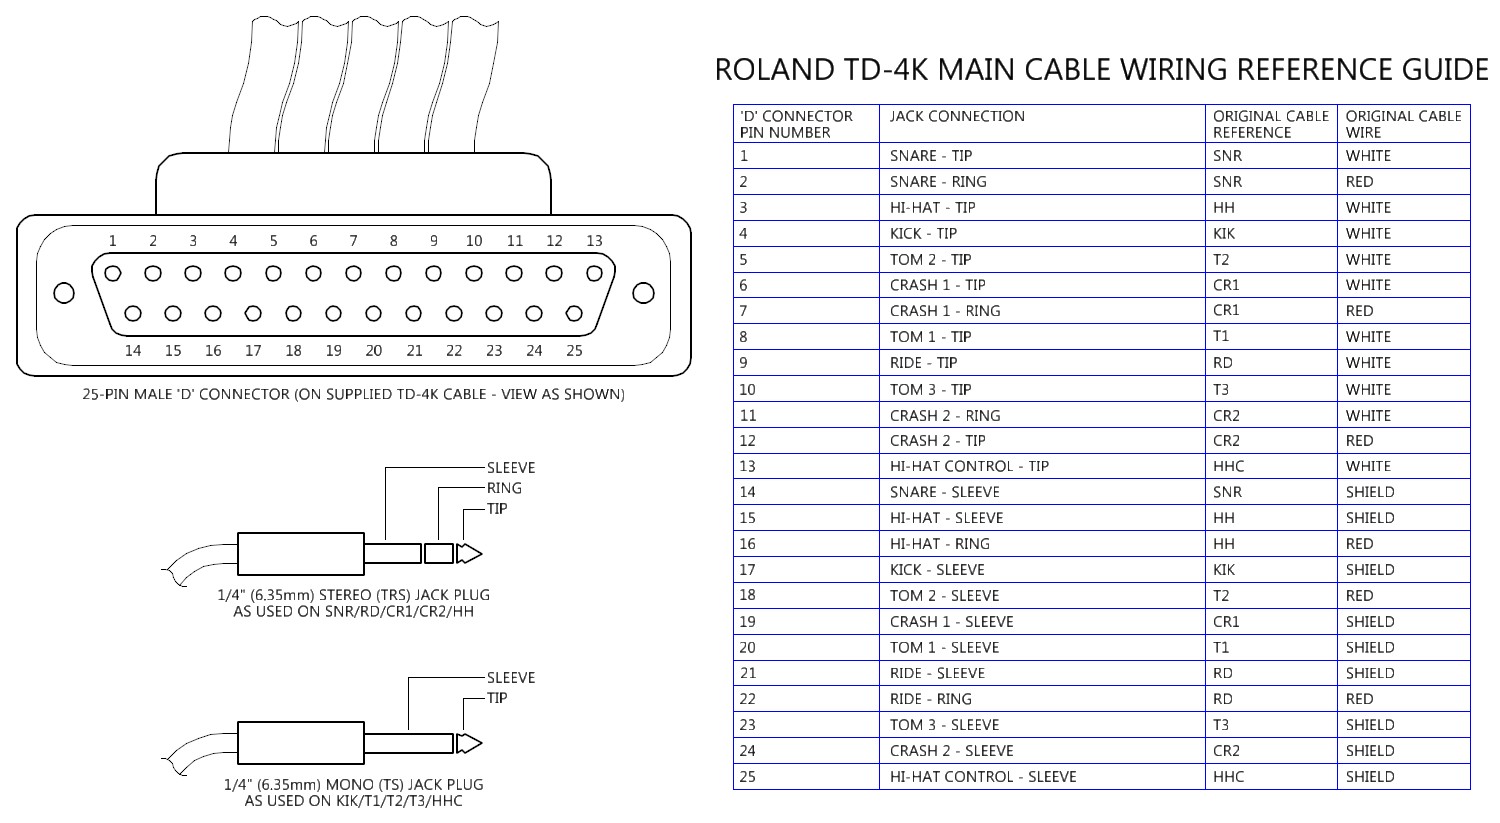 TD4+Main+Cable+Wiring+Reference+Guide.jpg